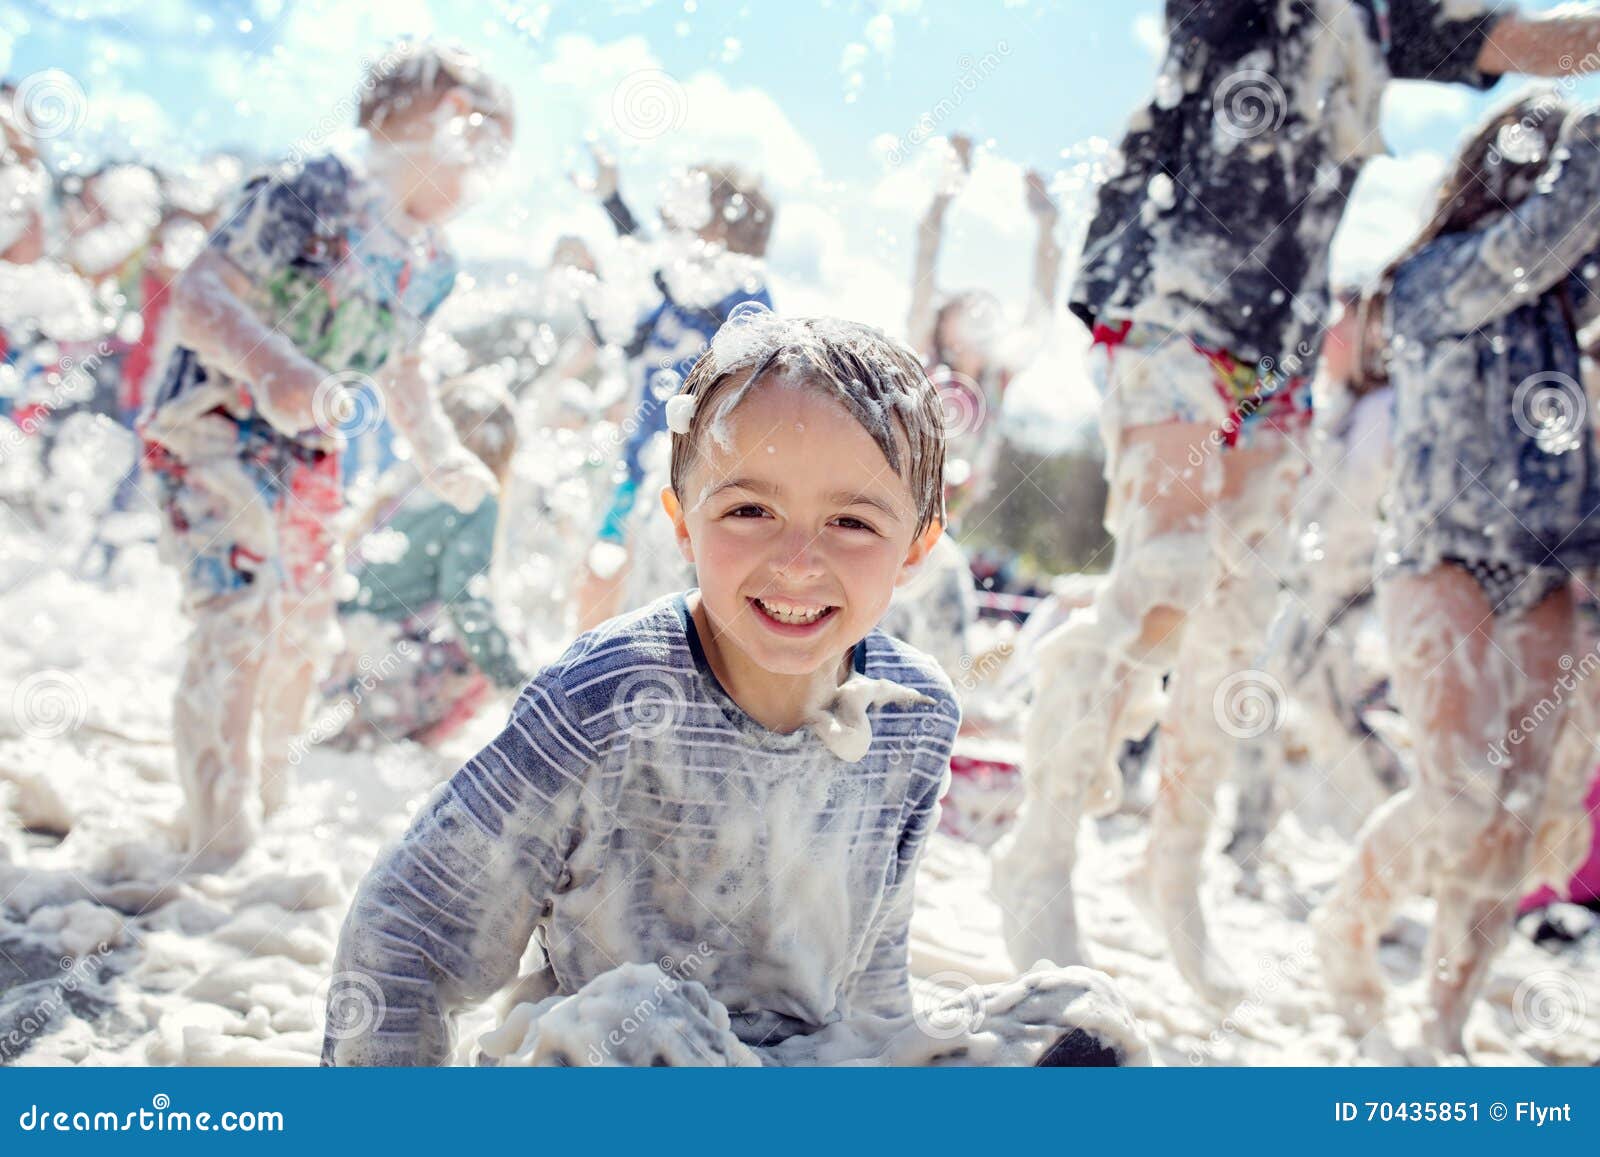 foam party and summer fun in the sun